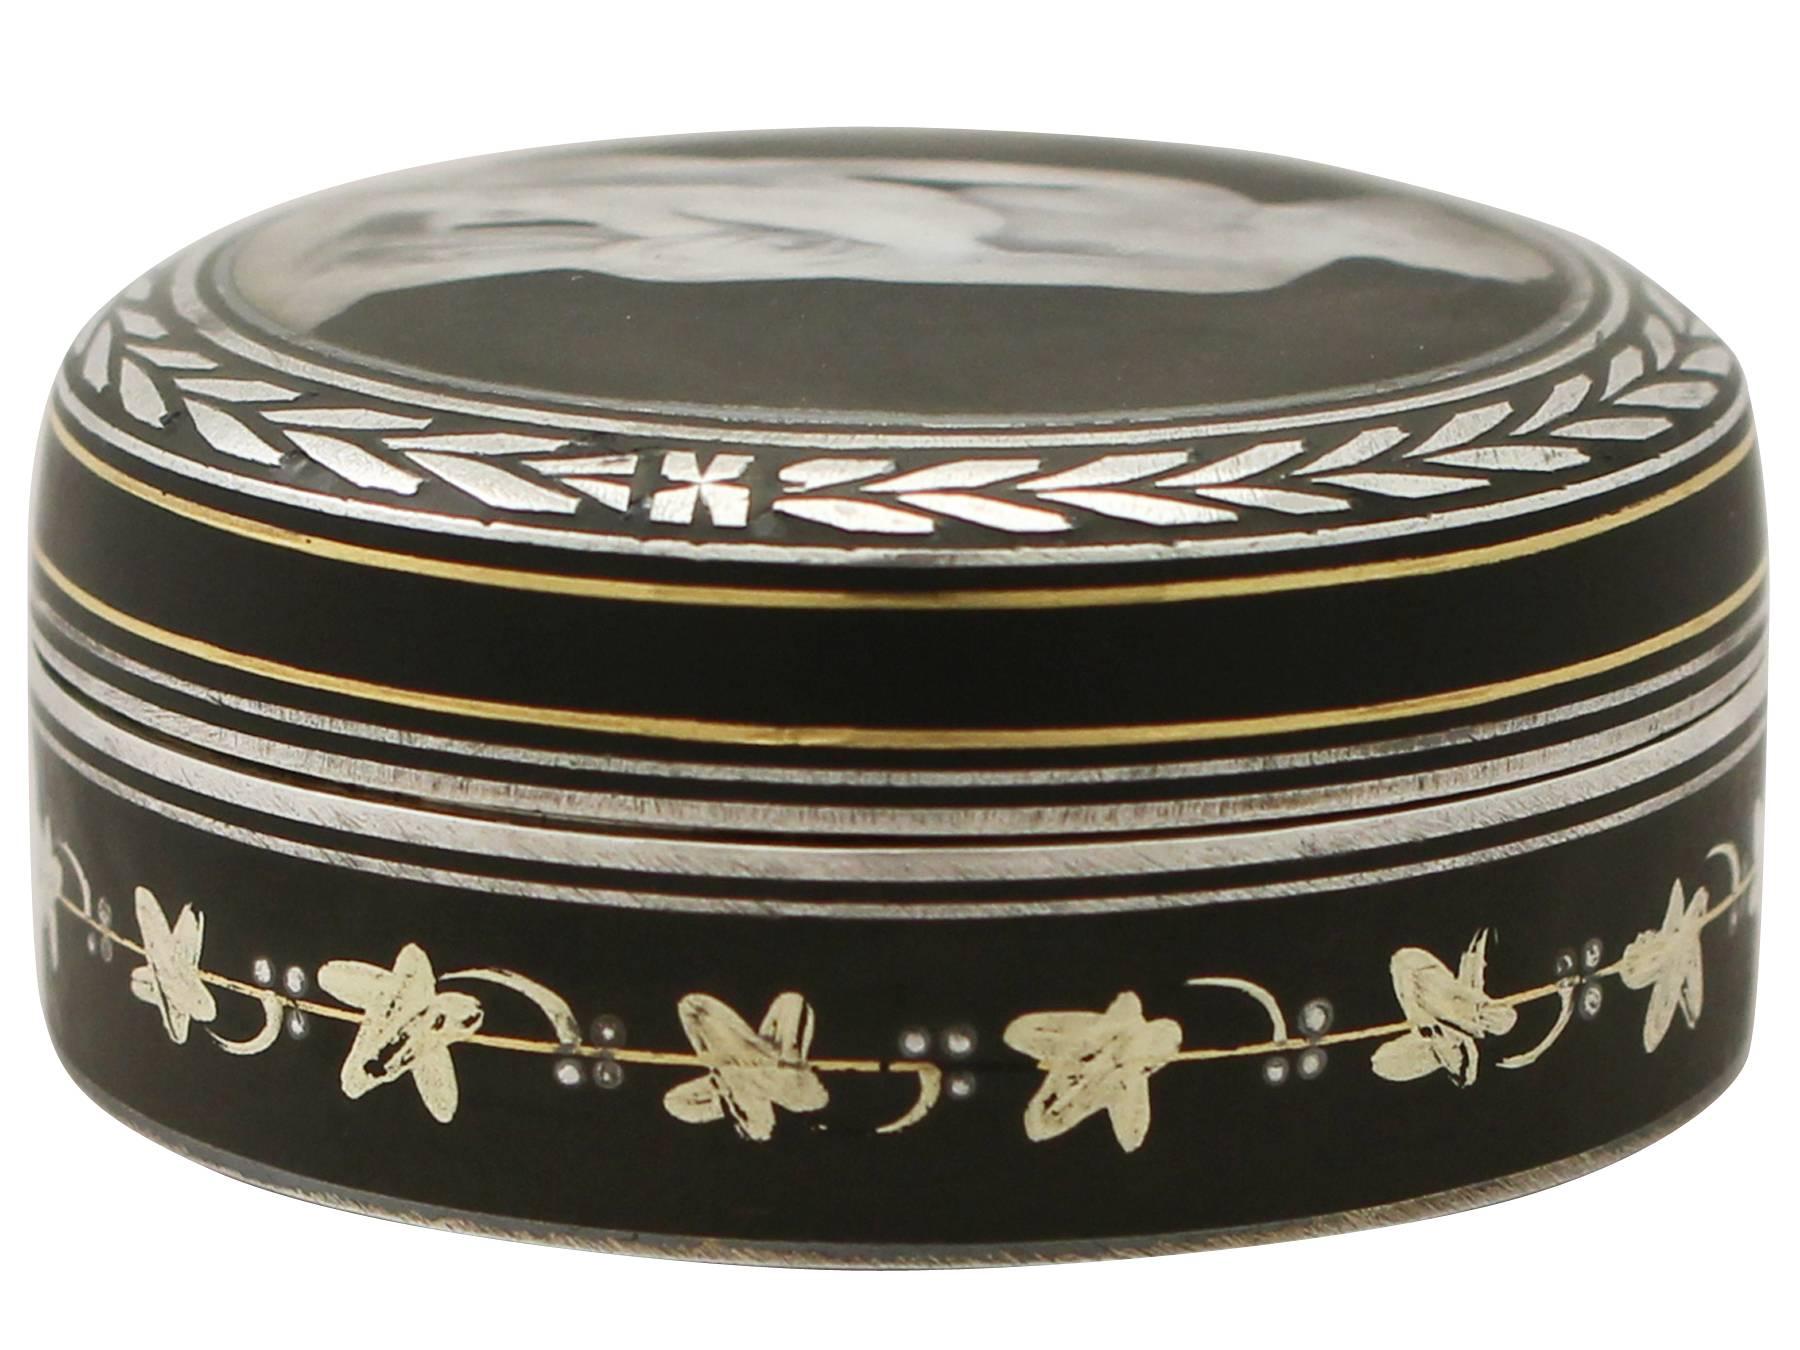 A fine antique continental sterling silver and transfer printed box; part of our continental silverware collection

This antique continental sterling silver and transfer printed box has a cylindrical form.

The body is encircled with inlaid gold and